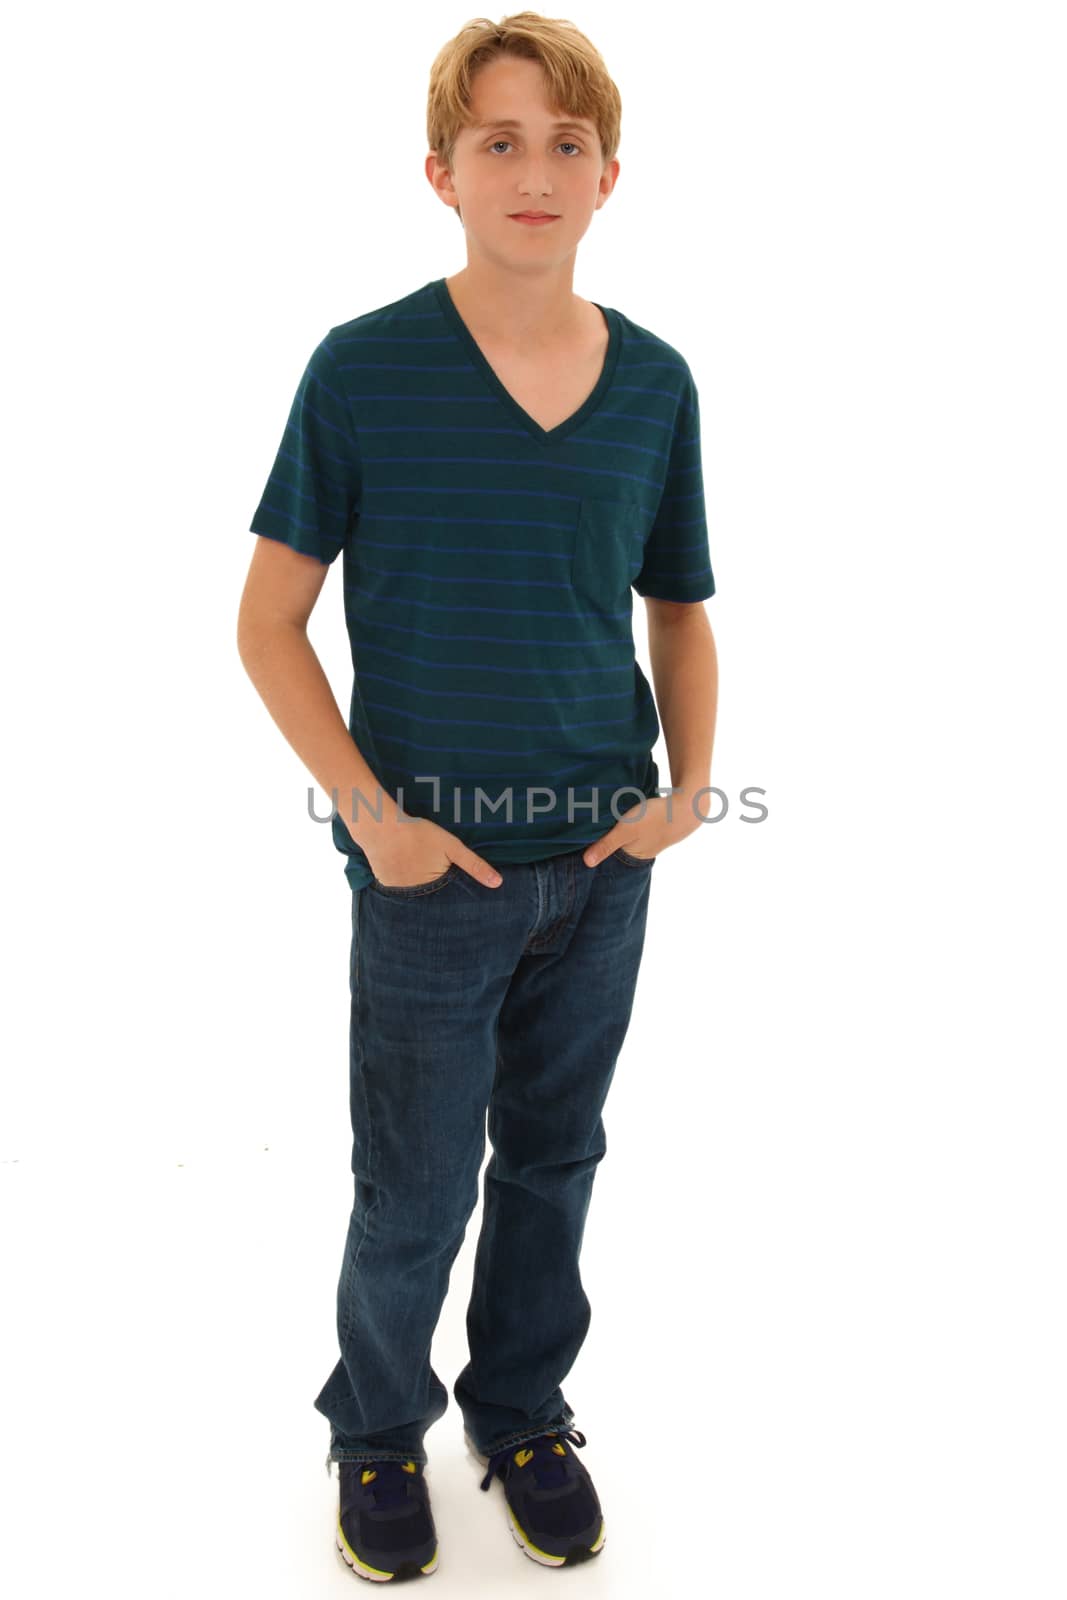 Attractive Teen Boy Caucasian Standing with Hands in Pockets by duplass